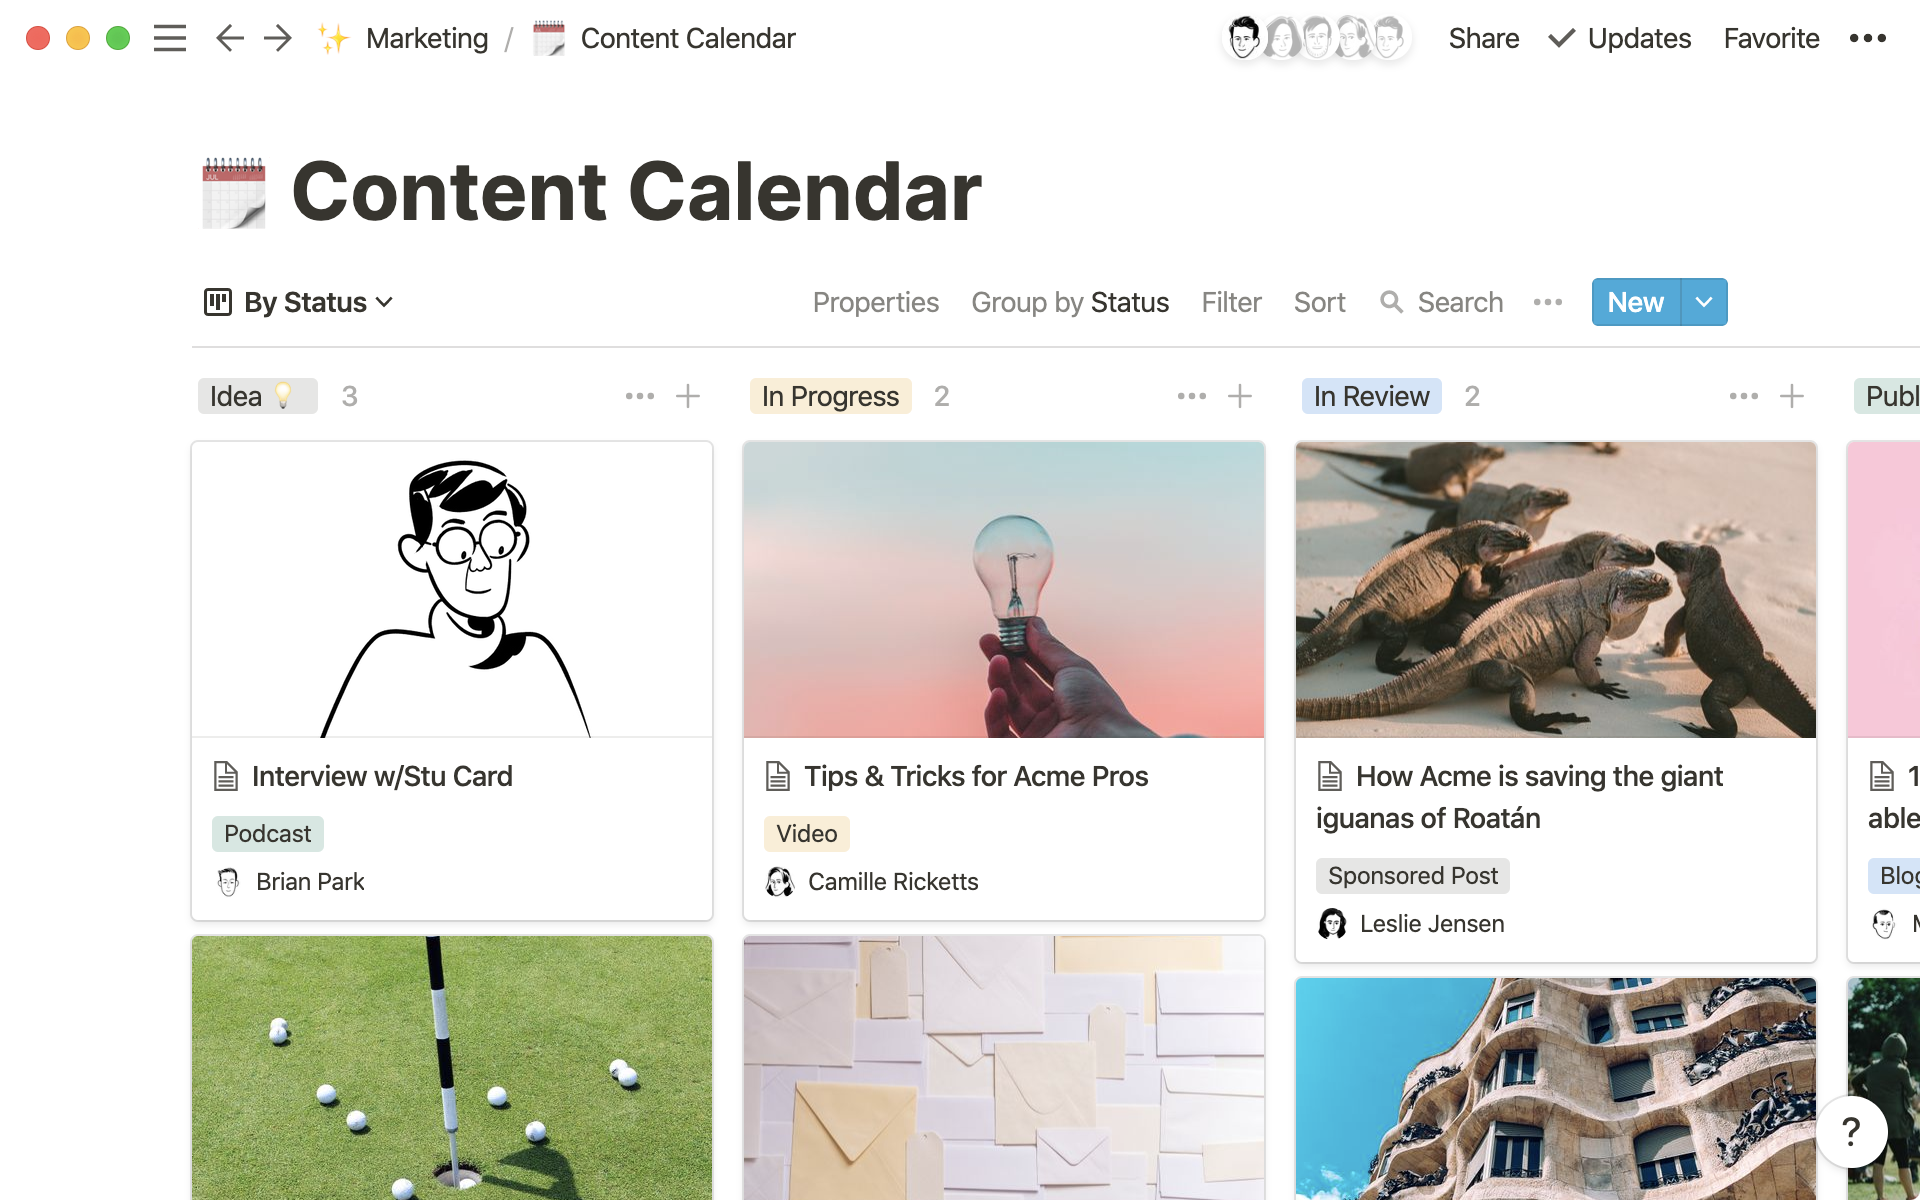 A content calendar to keep all your marketing team’s work organized.